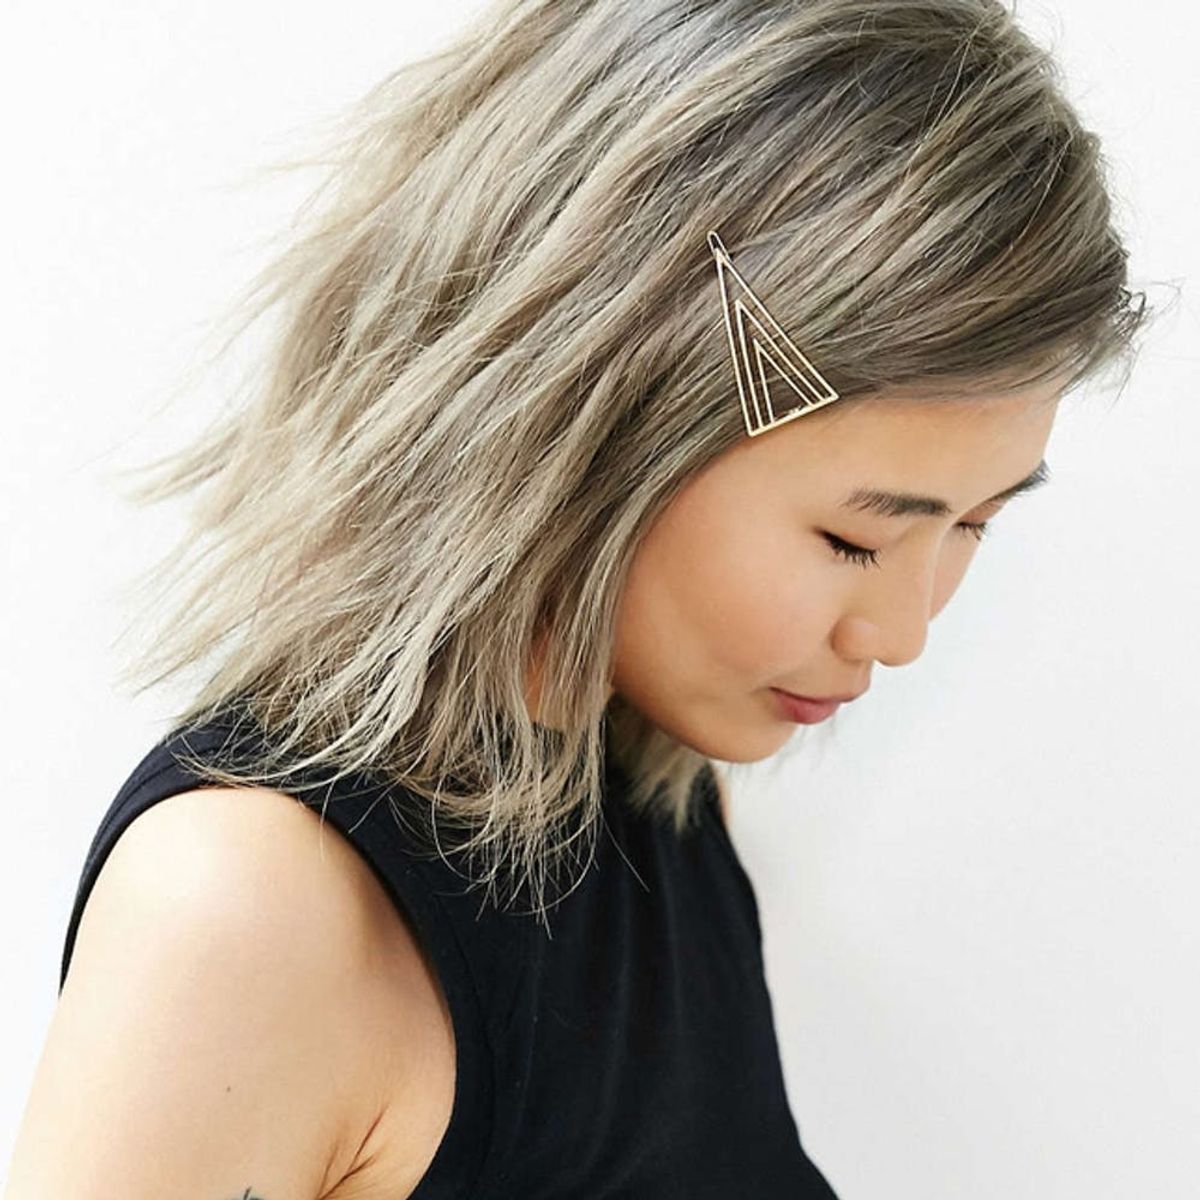 12 #LazyGirl Hair Accessories for the Easiest Hairstyles Ever